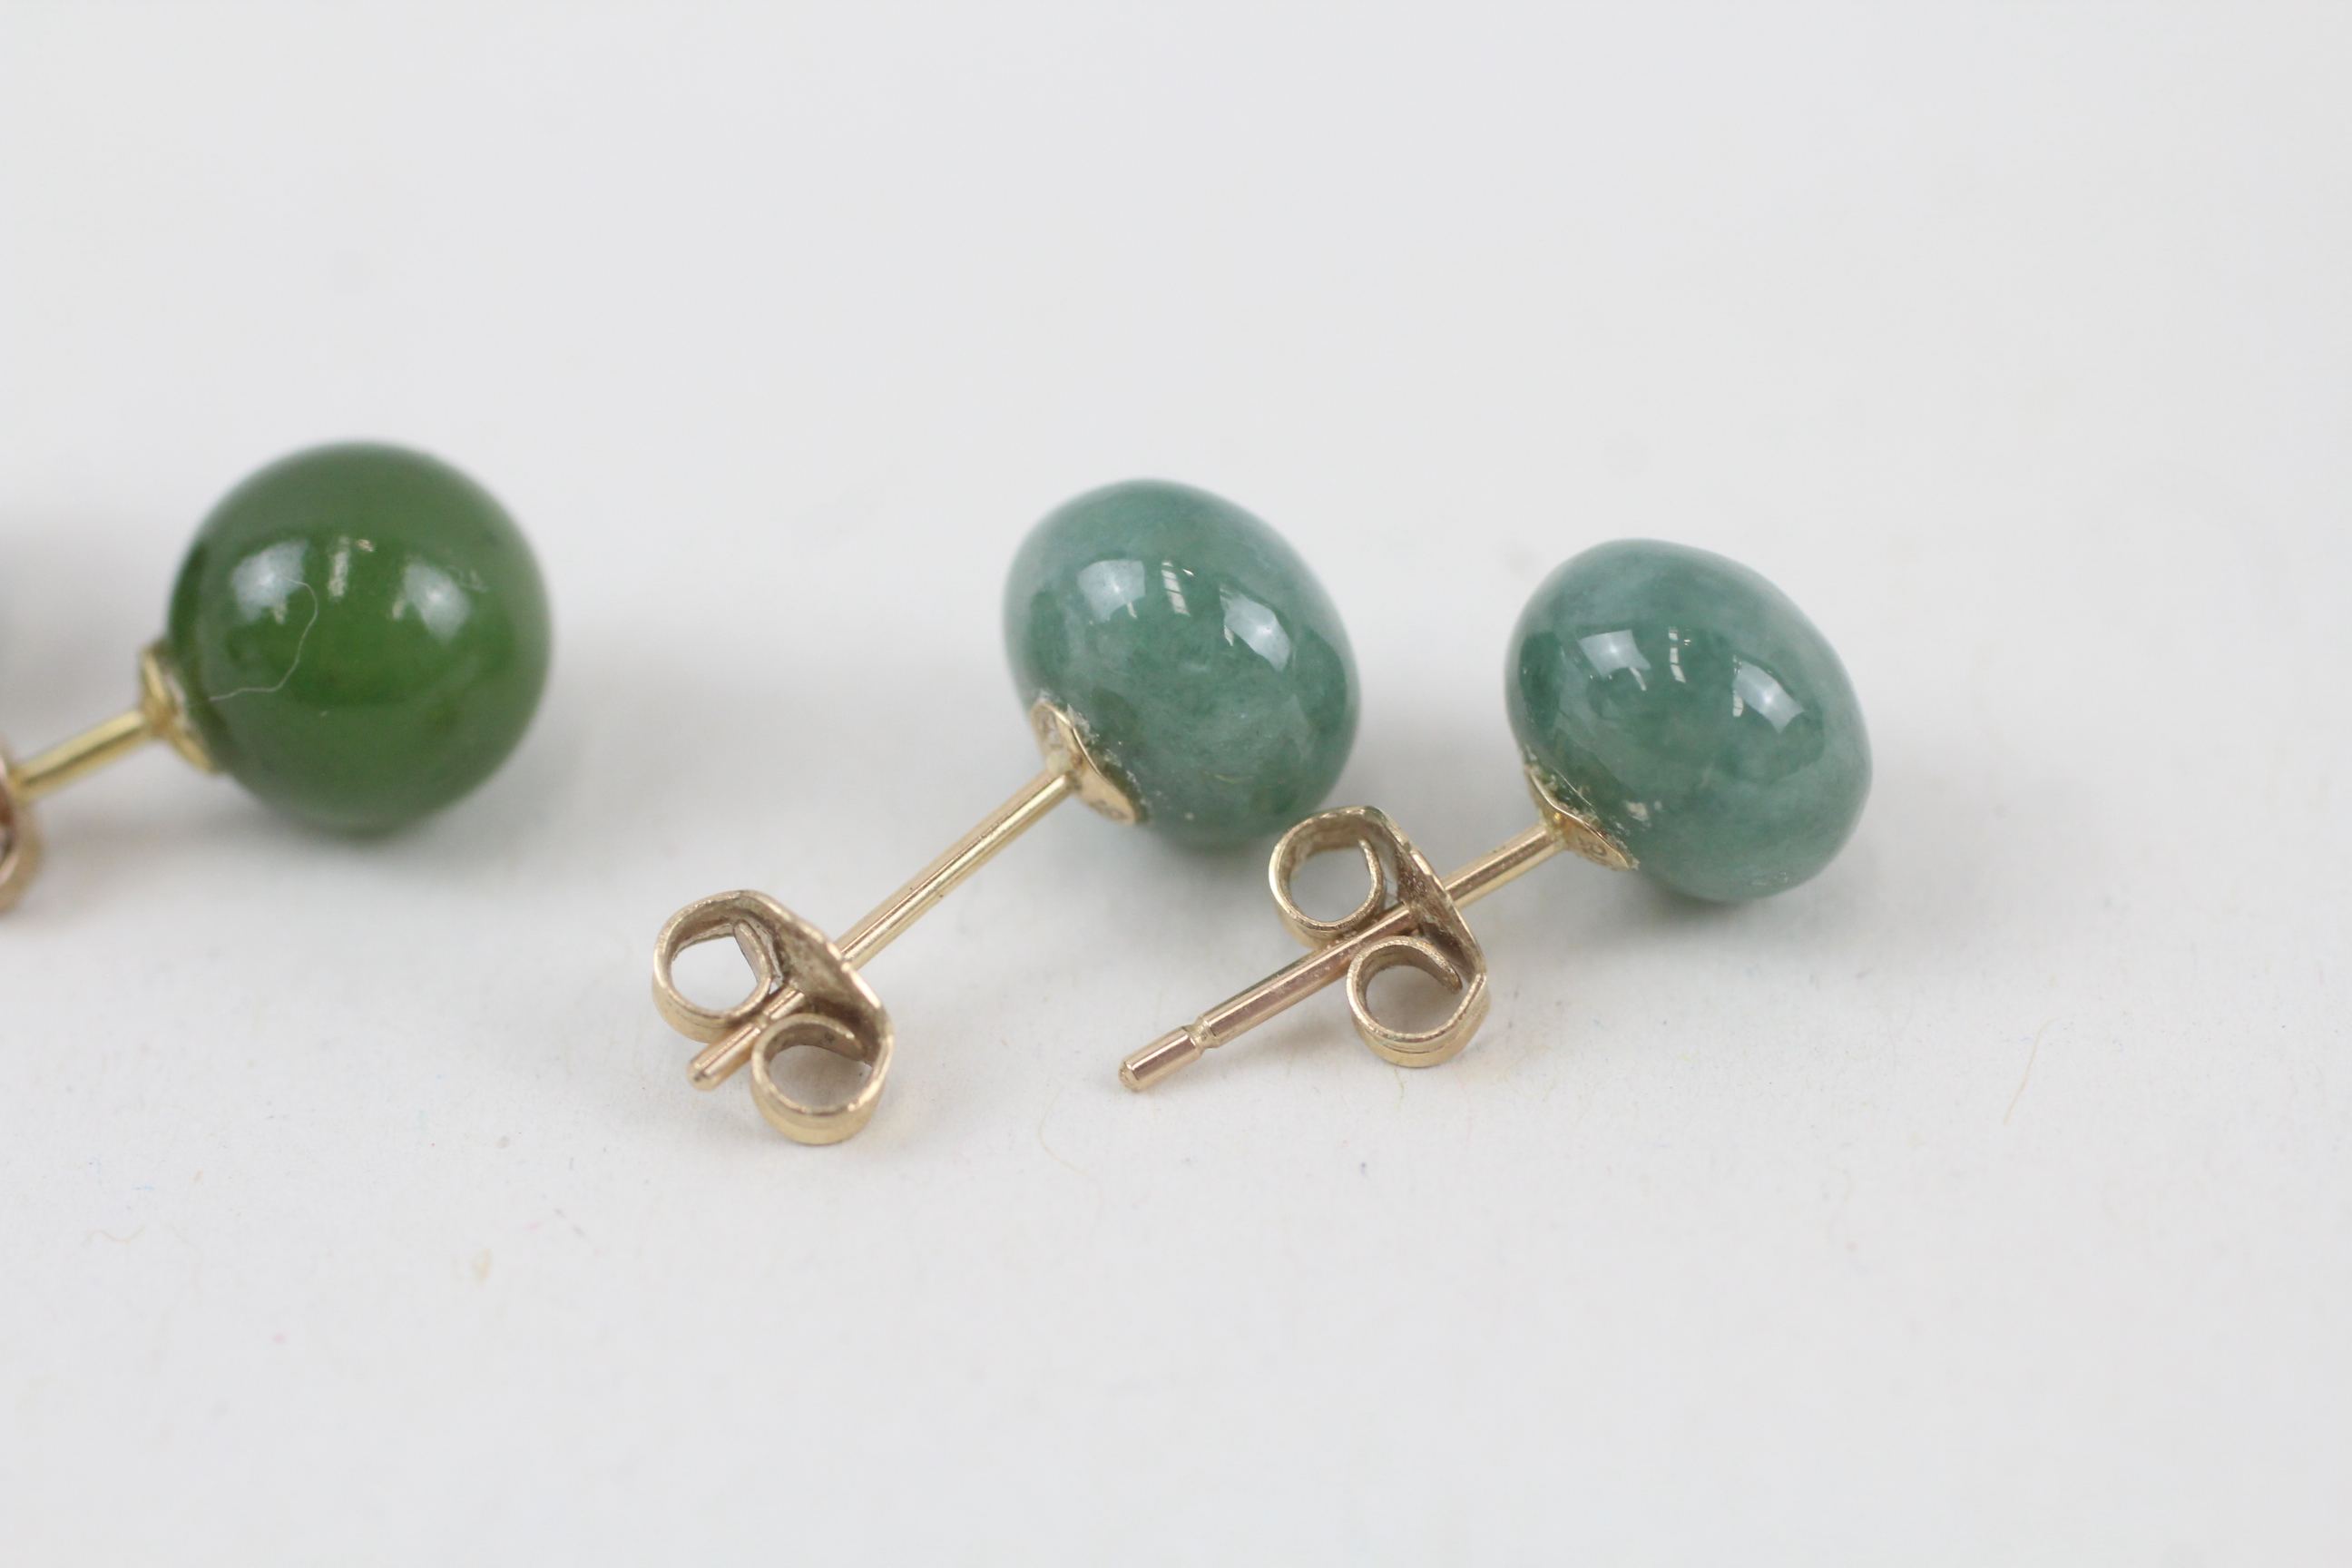 2x 9ct gold nephrite & jade stud earrings with scroll backs - 3.7 g - Image 6 of 6